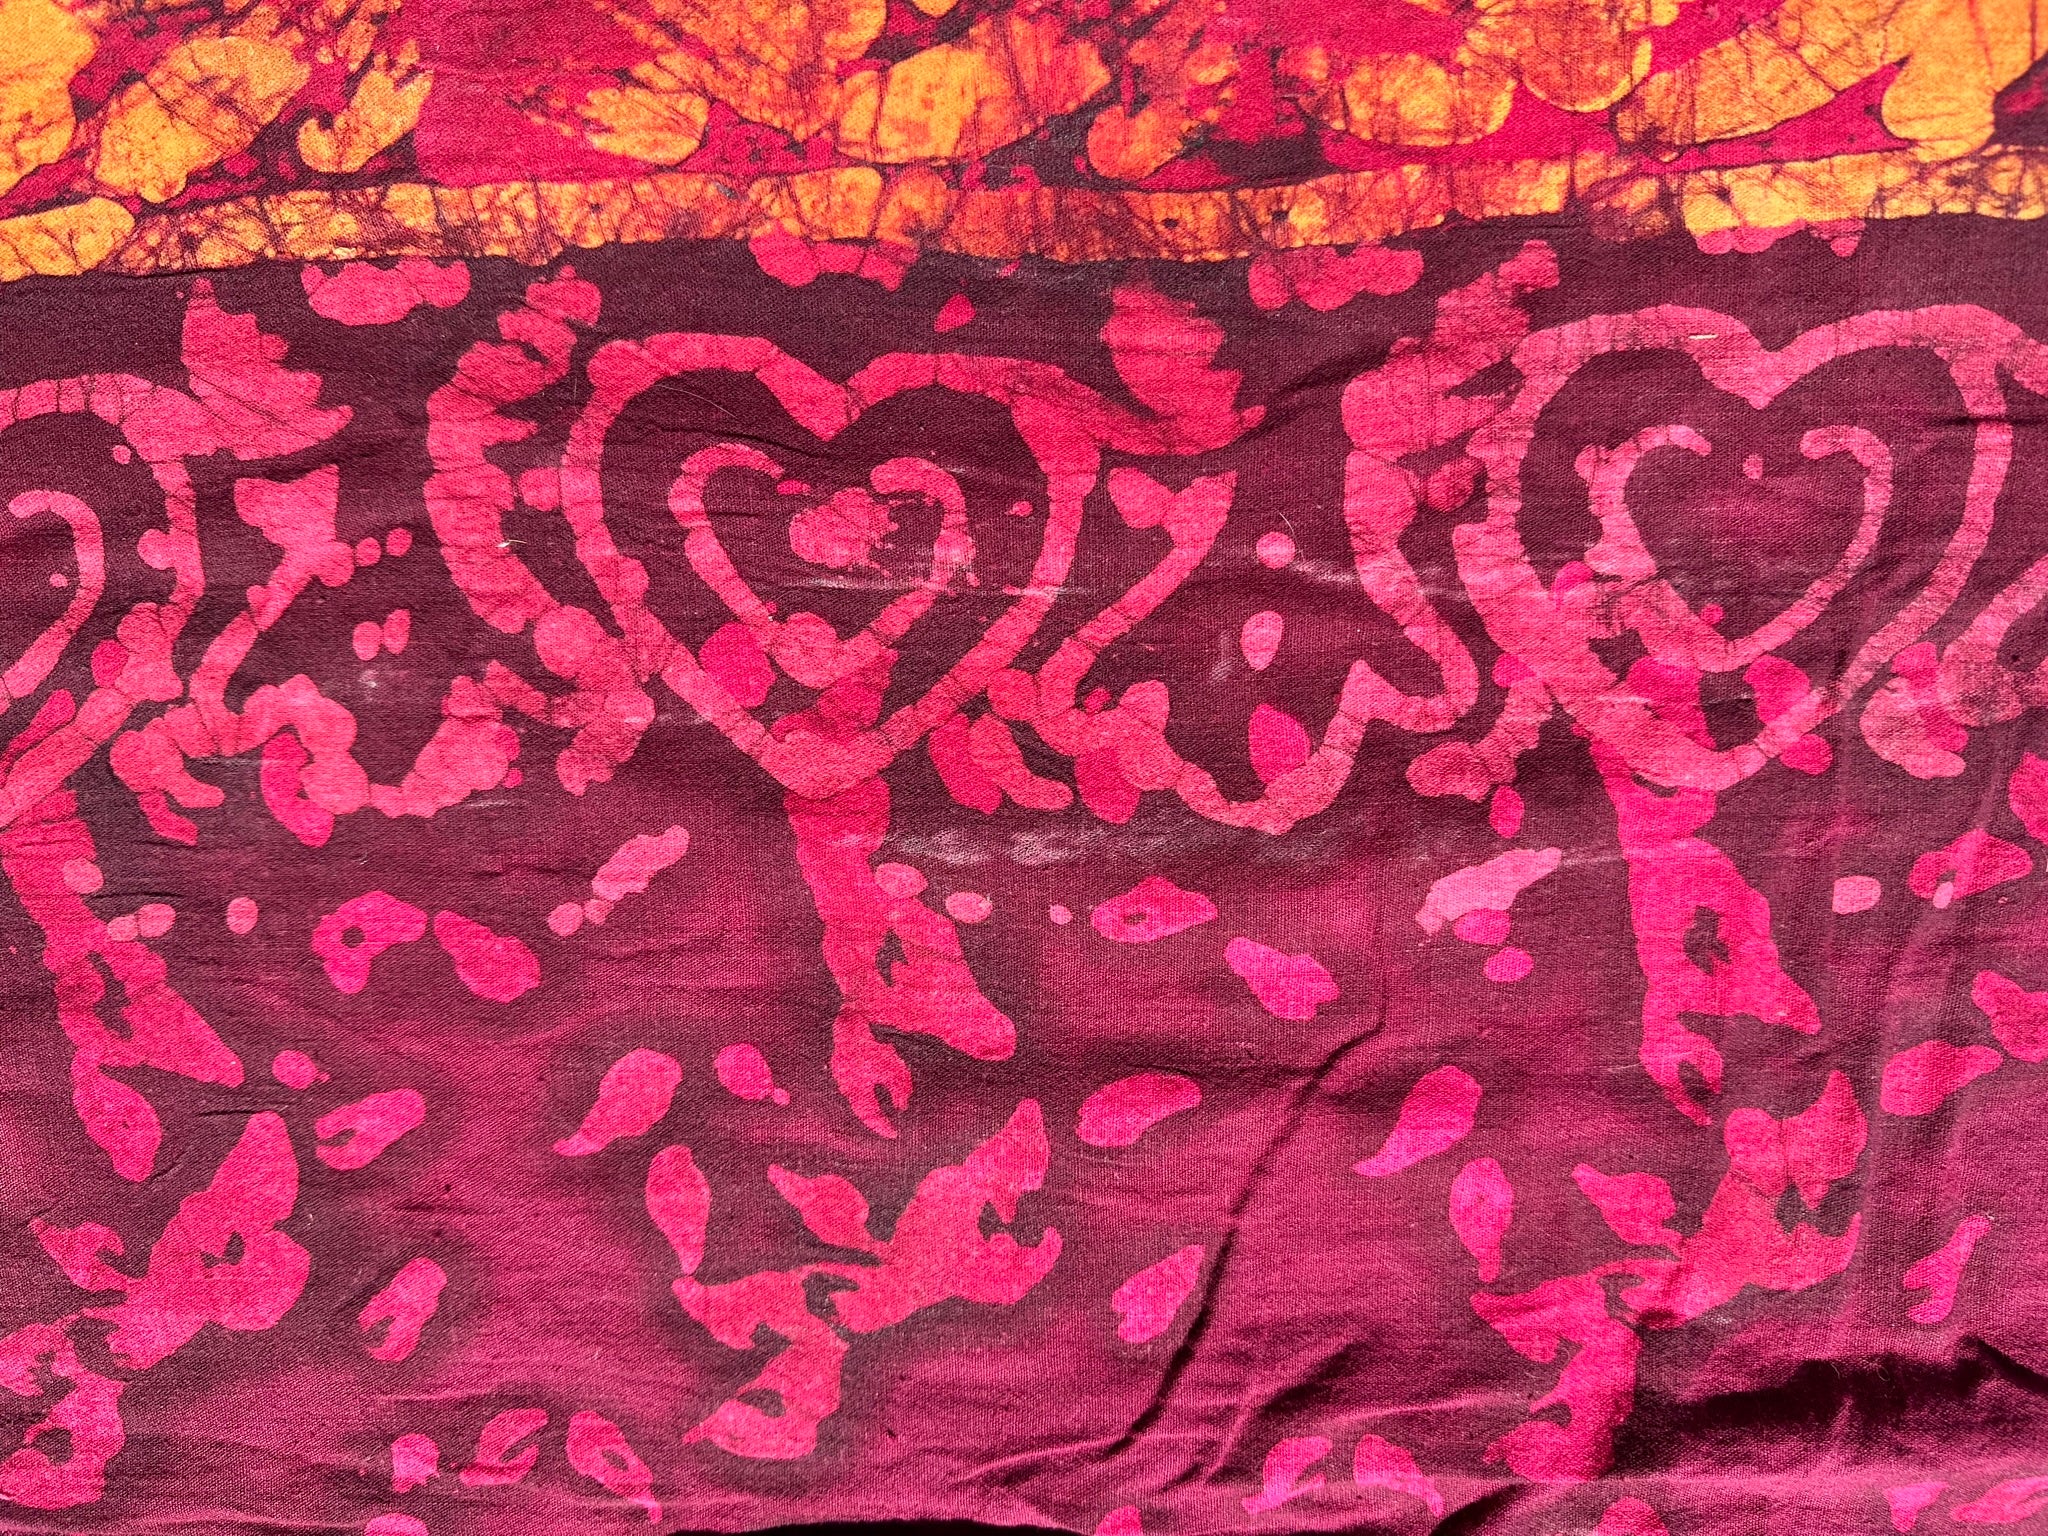 82x35 Pink and Red Batik Tablecloth